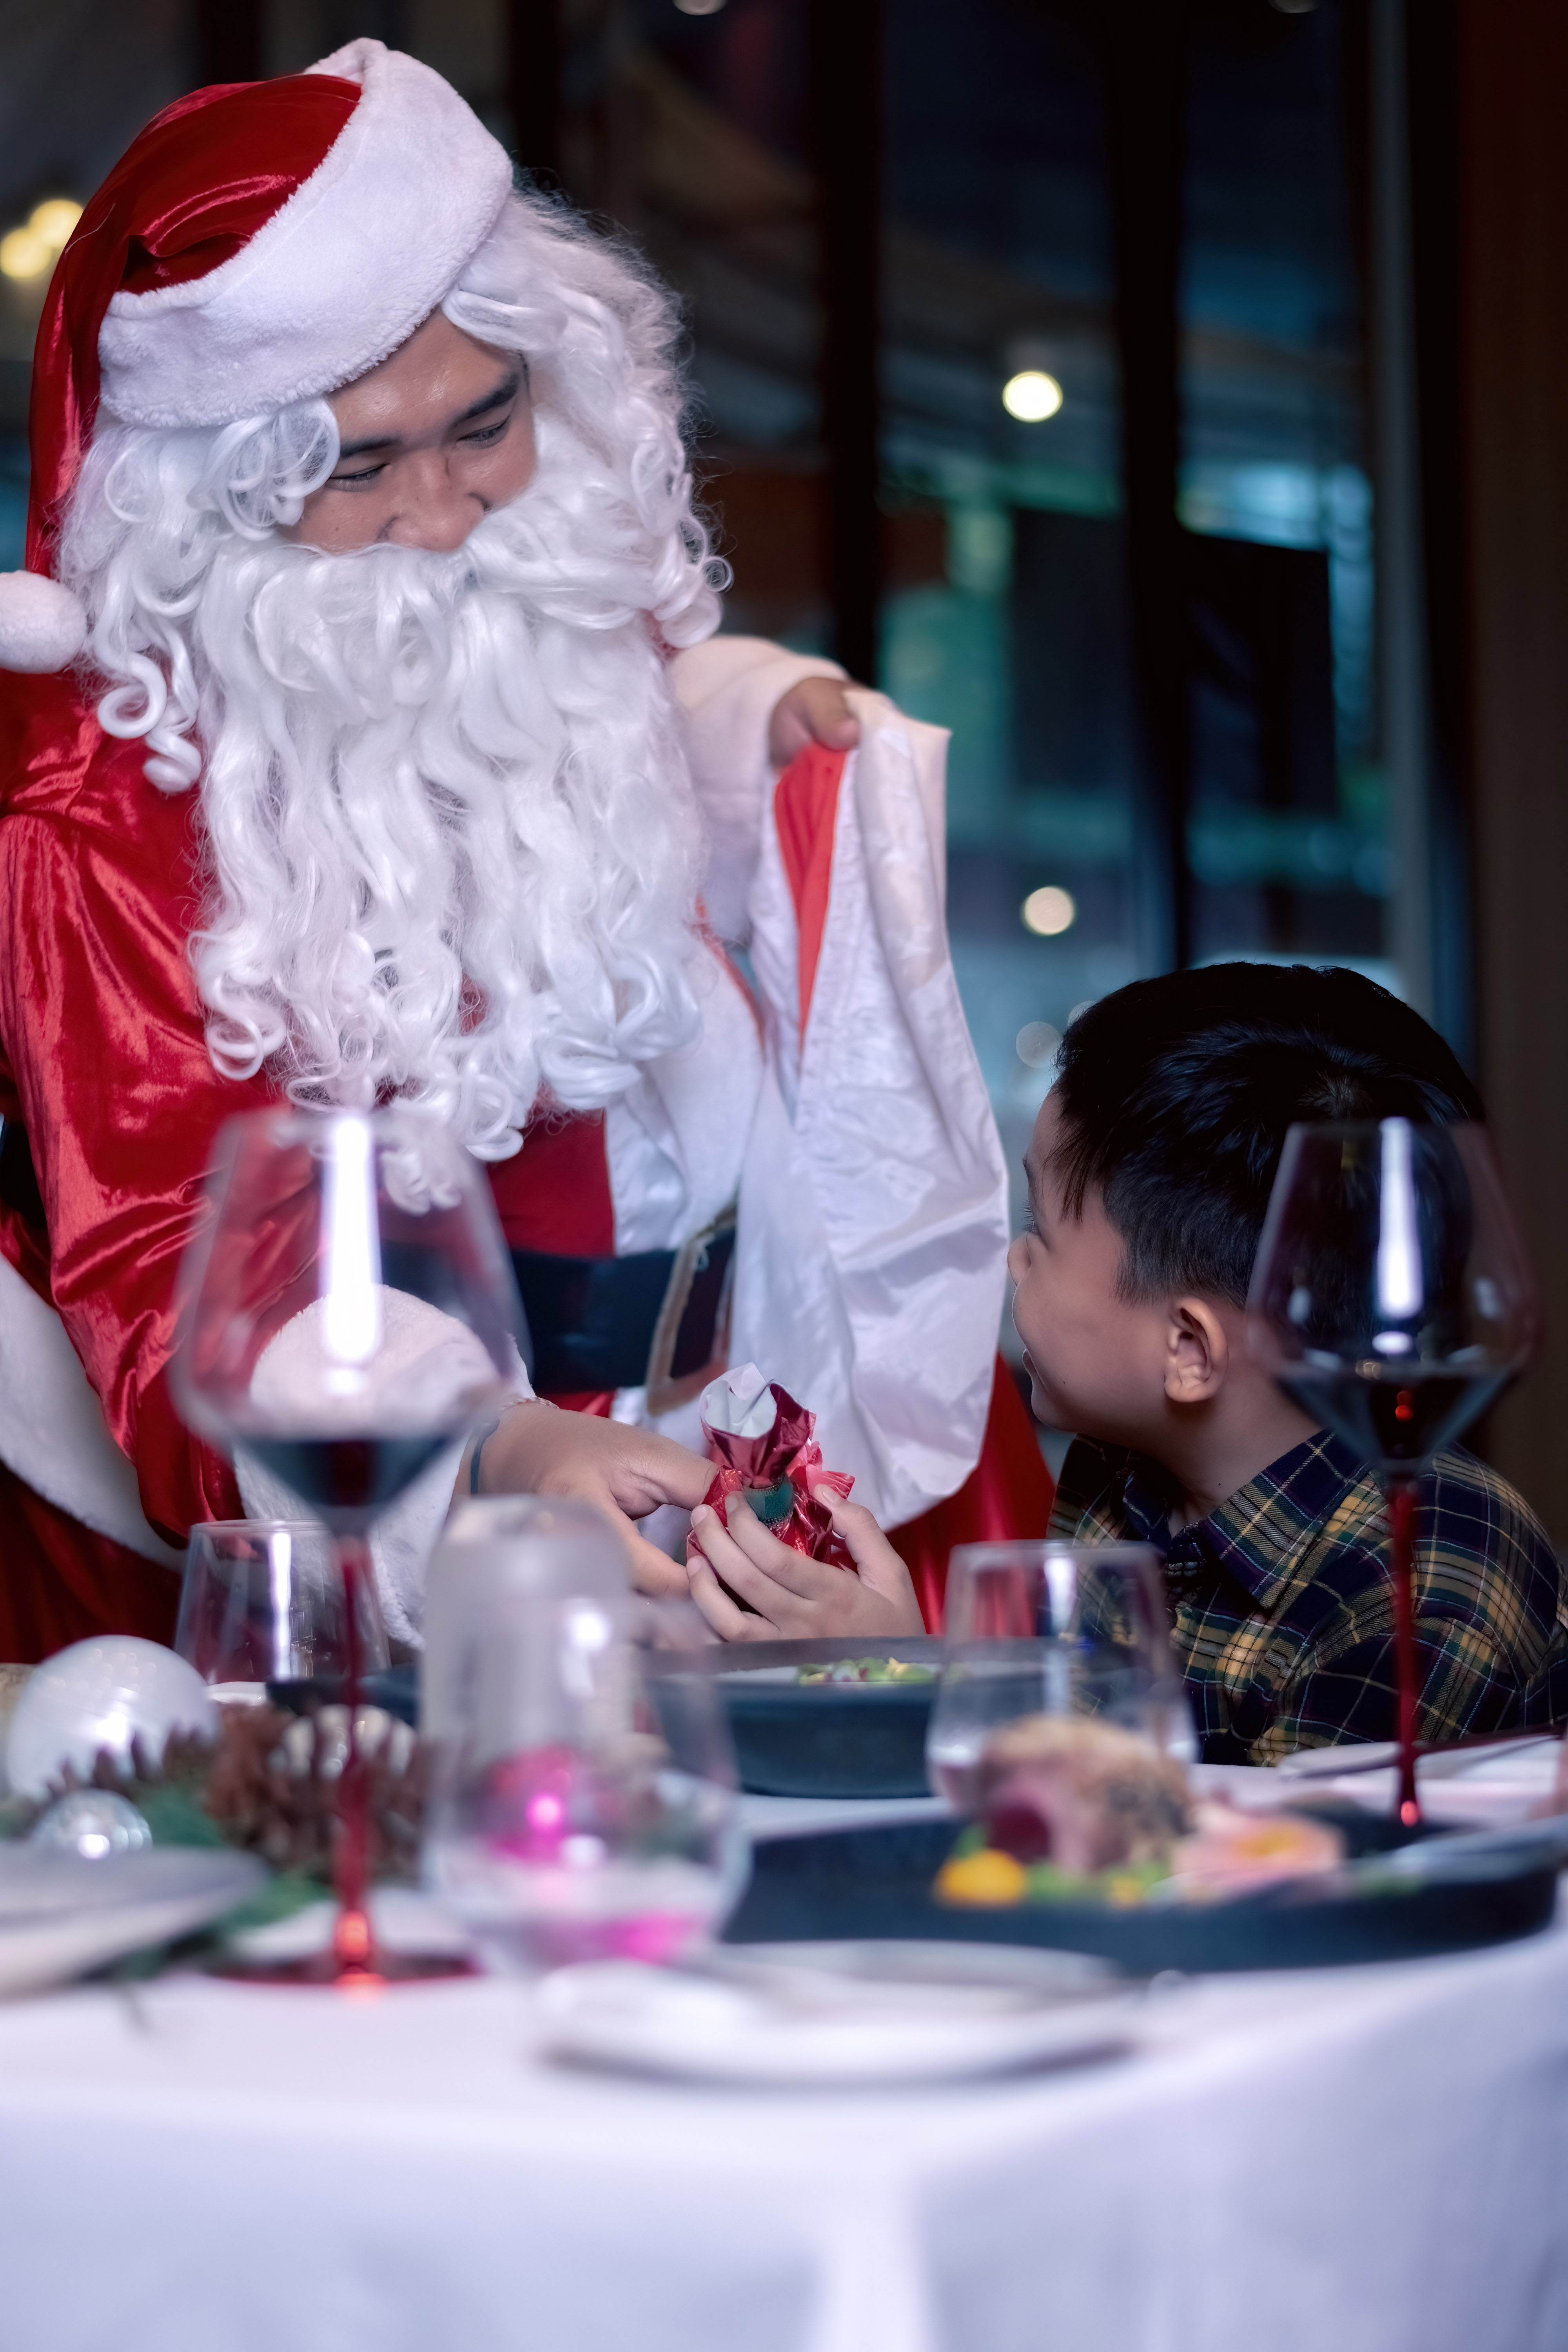 A Festive Finish, a delightful meet-and-greet with Santa Claus for the little celebrants